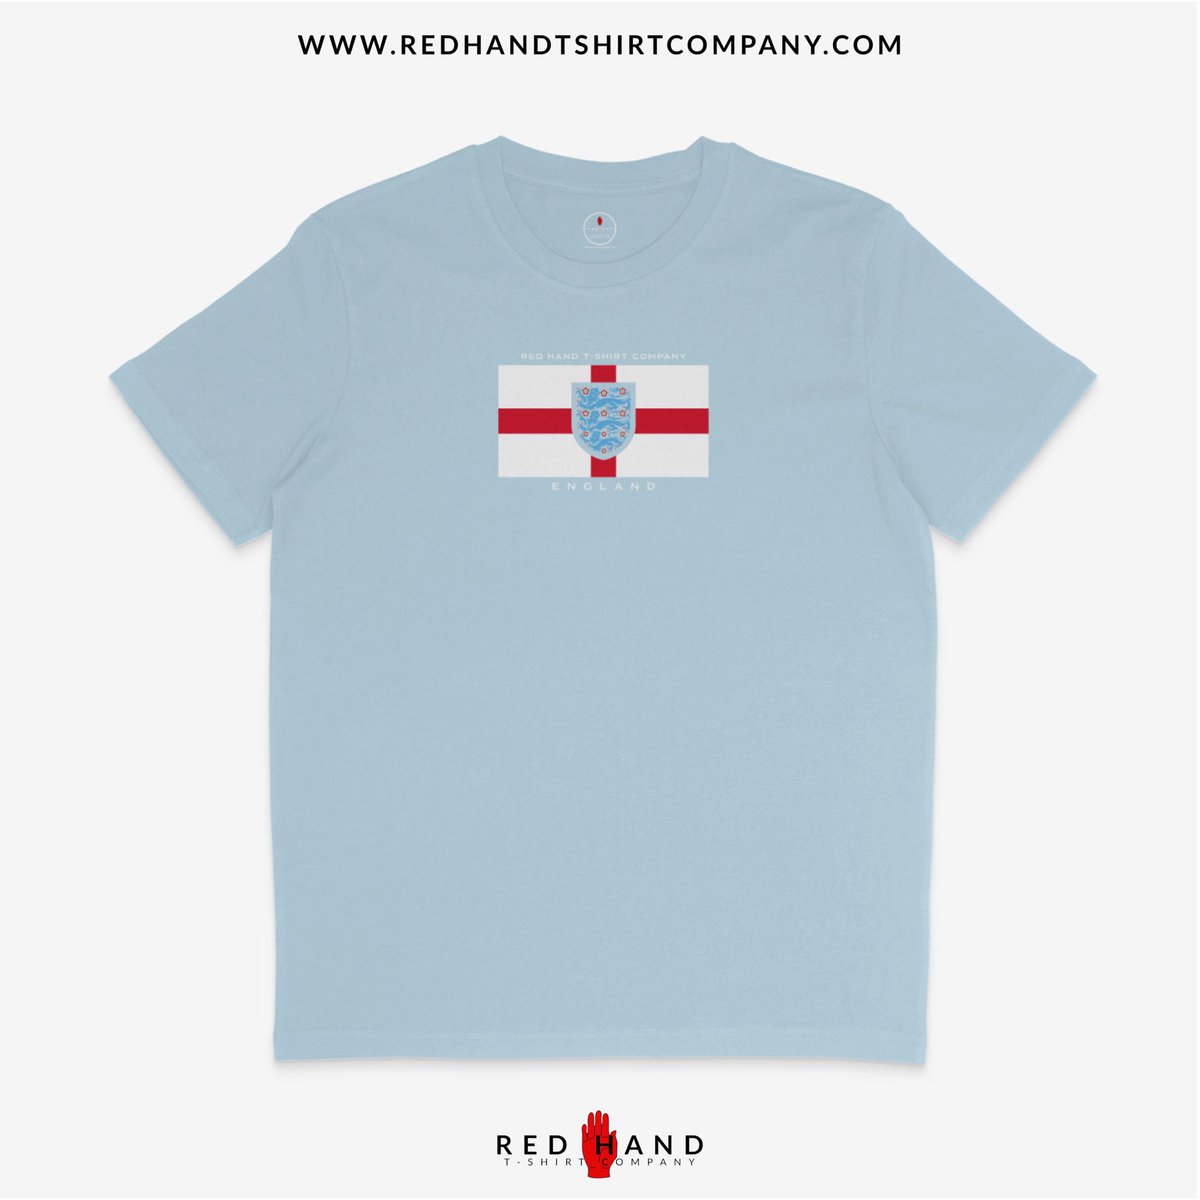 Happy St George’s Day 🏴󠁧󠁢󠁥󠁮󠁧󠁿

Use code STGEORGE20 for 20% off any of these T-shirts until midnight! 

redhandtshirtcompany.com

Red Hand T-shirt Company. Born Under A Union Jack

#redhandtshirtcompany #terracewear #casual #britishcasualclothing #football #loyalistculture…